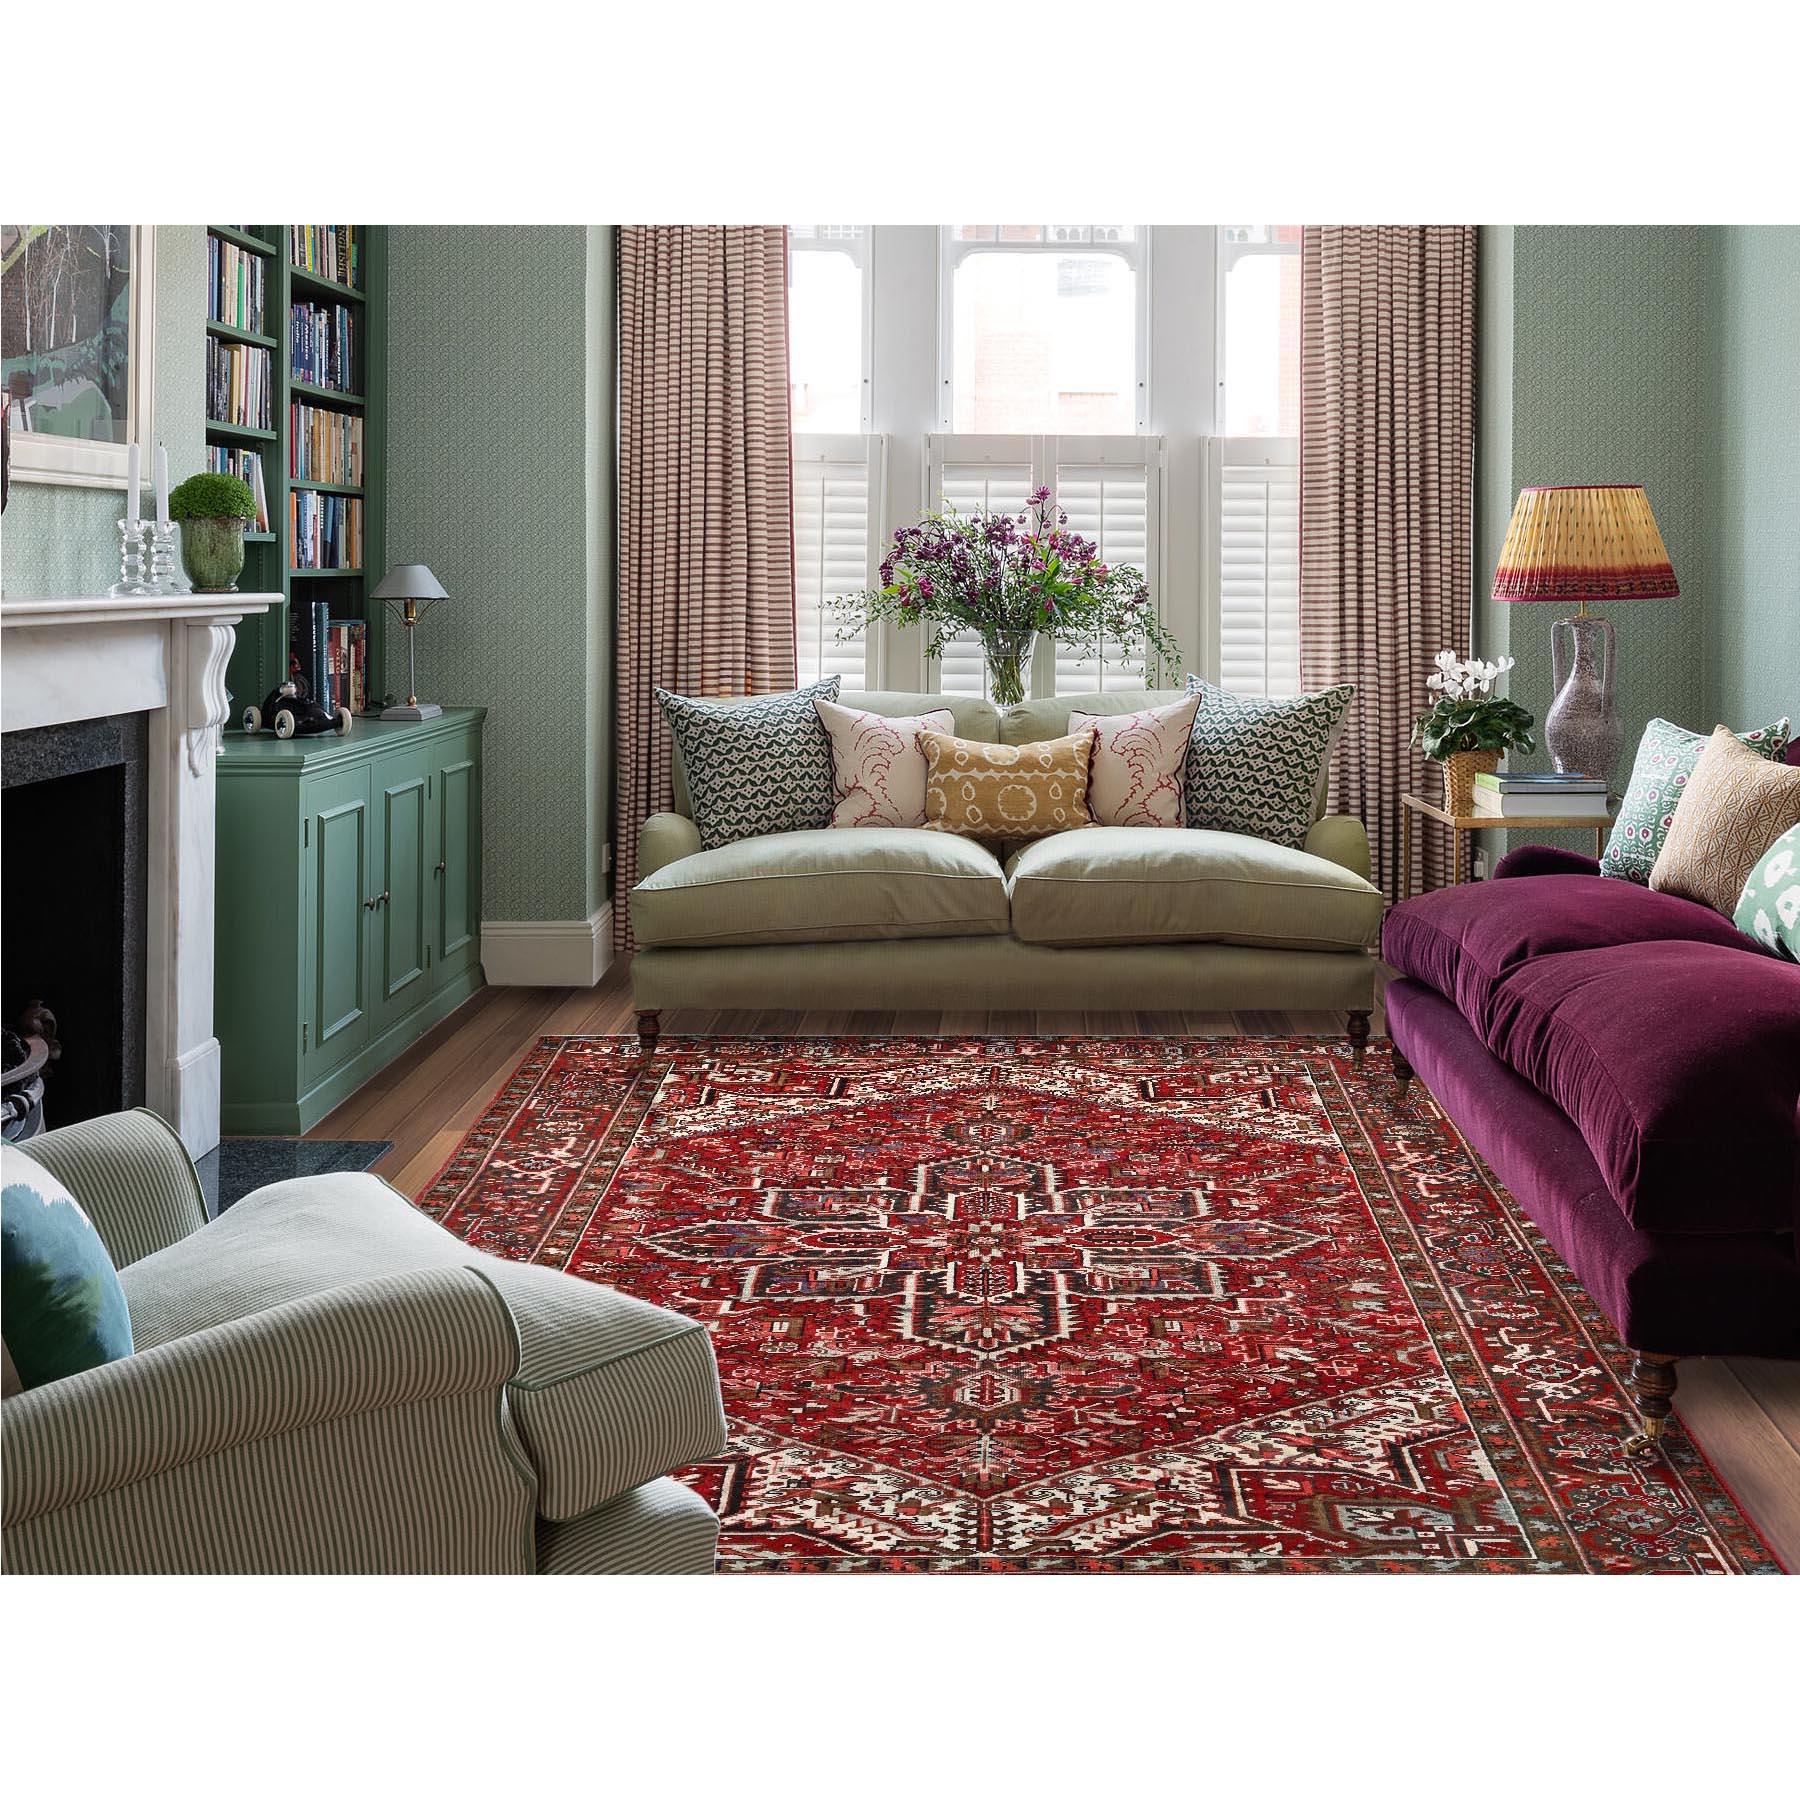 This fabulous Hand-Knotted carpet has been created and designed for extra strength and durability. This rug has been handcrafted for weeks in the traditional method that is used to make
Exact Rug Size in Feet and Inches : 7'9